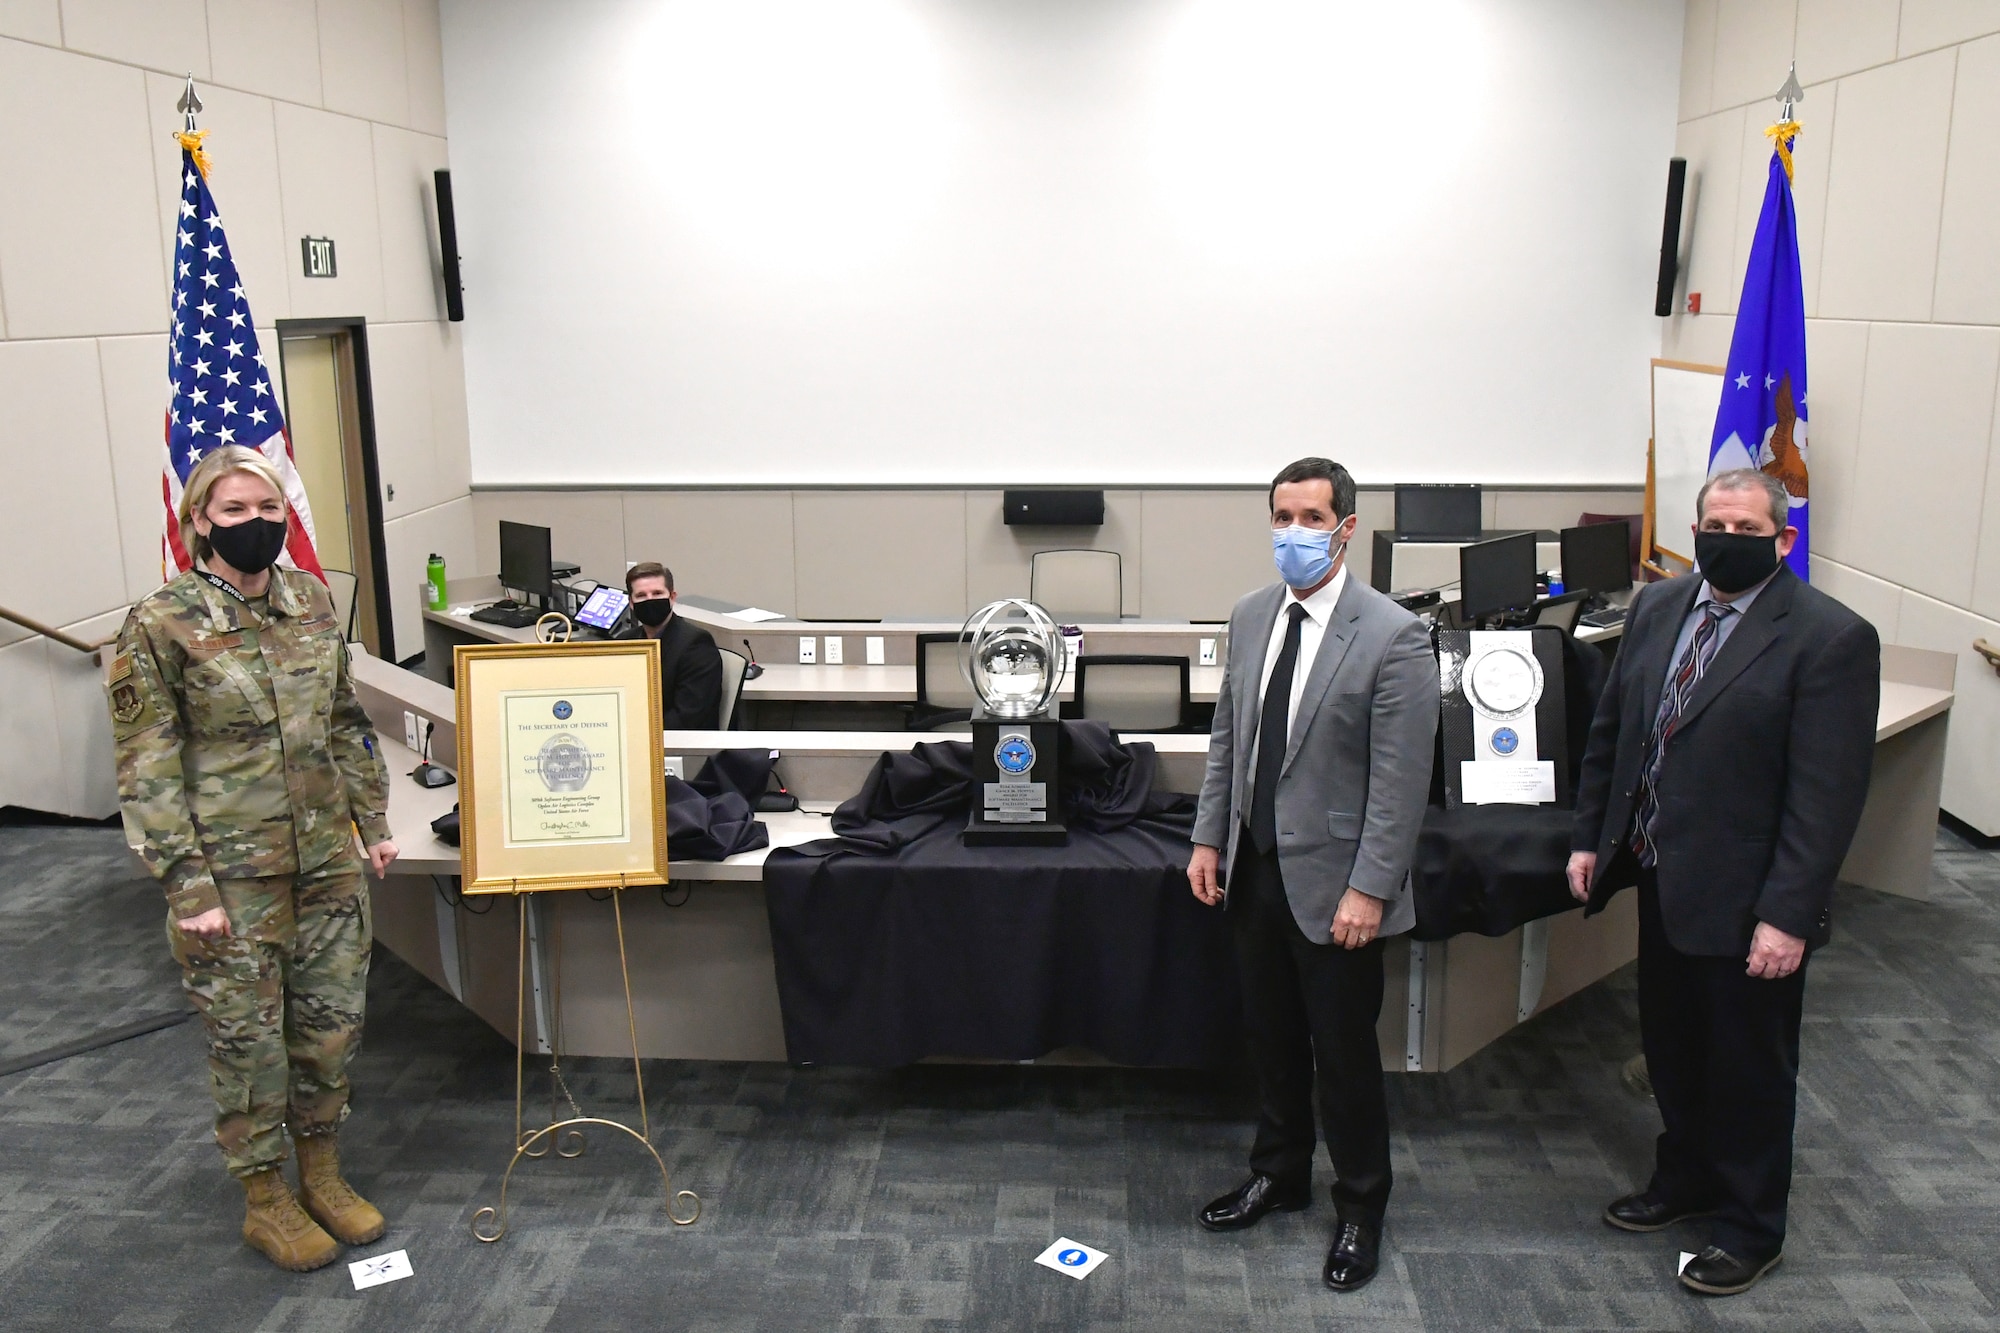 (Left to right) Brig. Gen. Cauley von Hoffman, Ogden Air Logistics Complex commander, Steven J. Morani, Principal Deputy Assistant Secretary of Defense for Logistics, and Jim Diamond, 309th Software Engineering Group director, stand for a photo during the presentation of the 2020 Rear Admiral Grace M. Hopper Award. The award trophy sits on a table behind them.